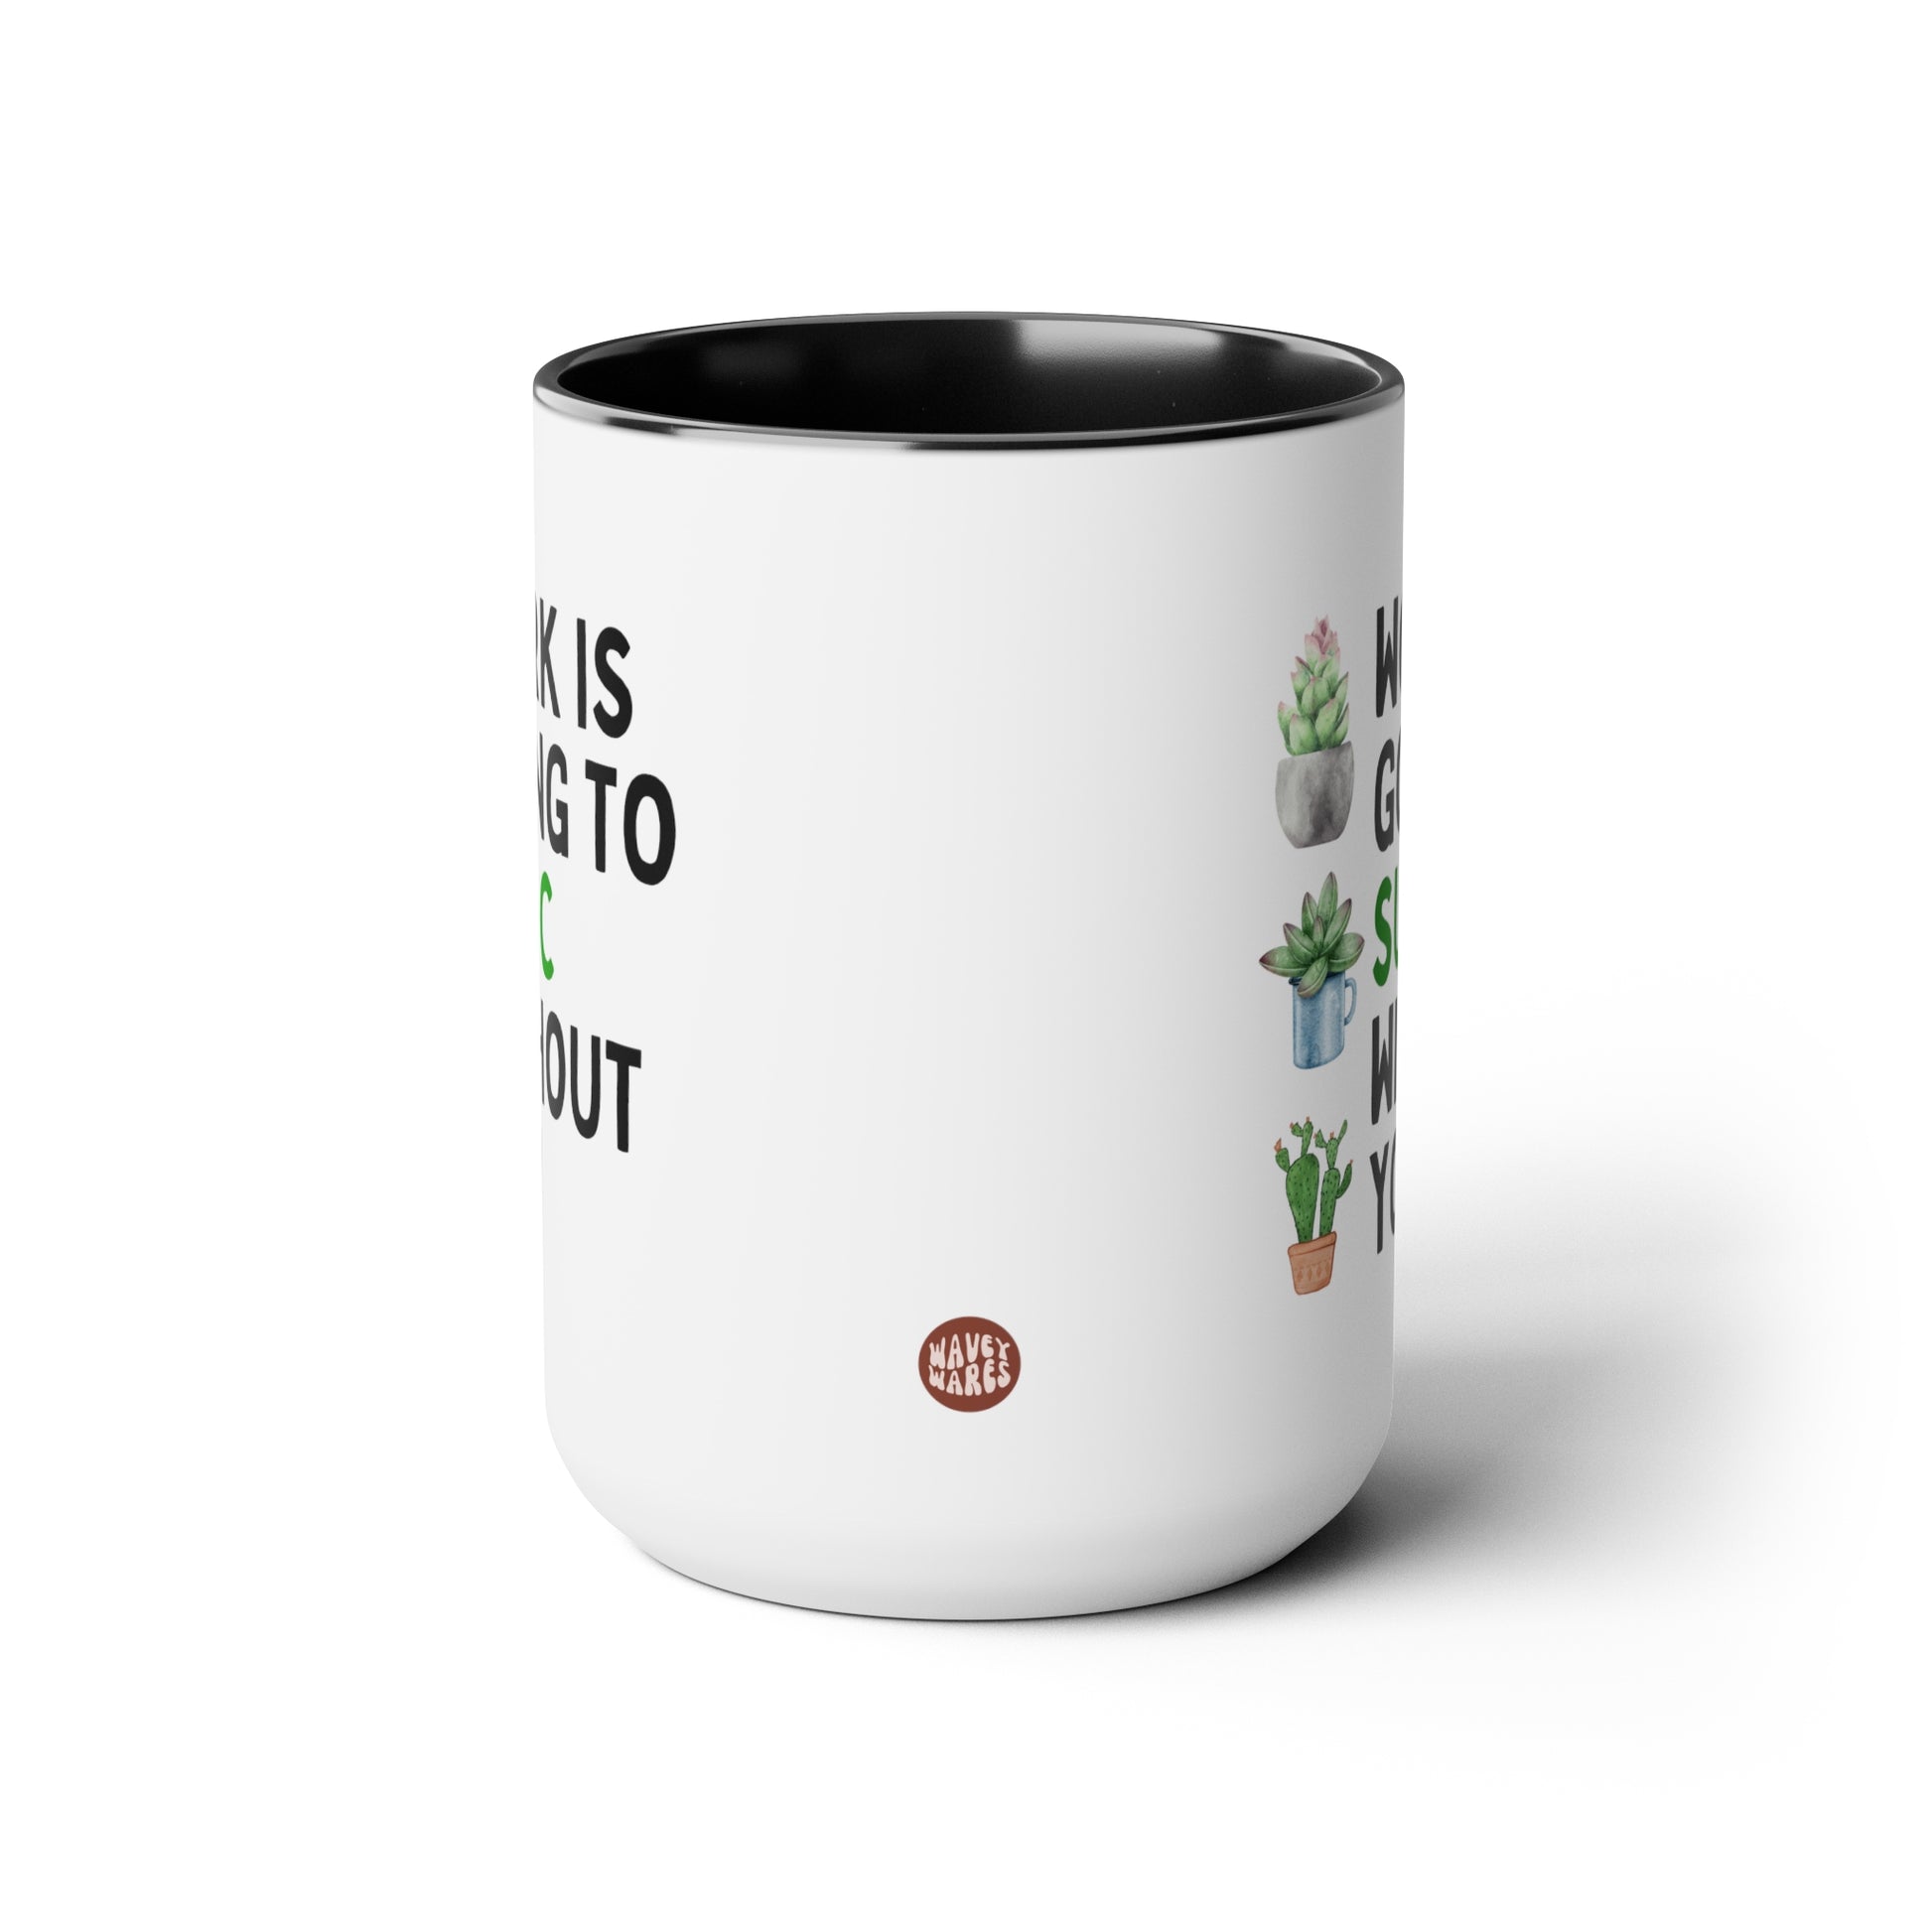 Work Is Going To Succ Without You 15oz white with black accent funny large coffee mug gift for coworker colleague leaving farewell plant lover succulents waveywares wavey wares wavywares wavy wares side